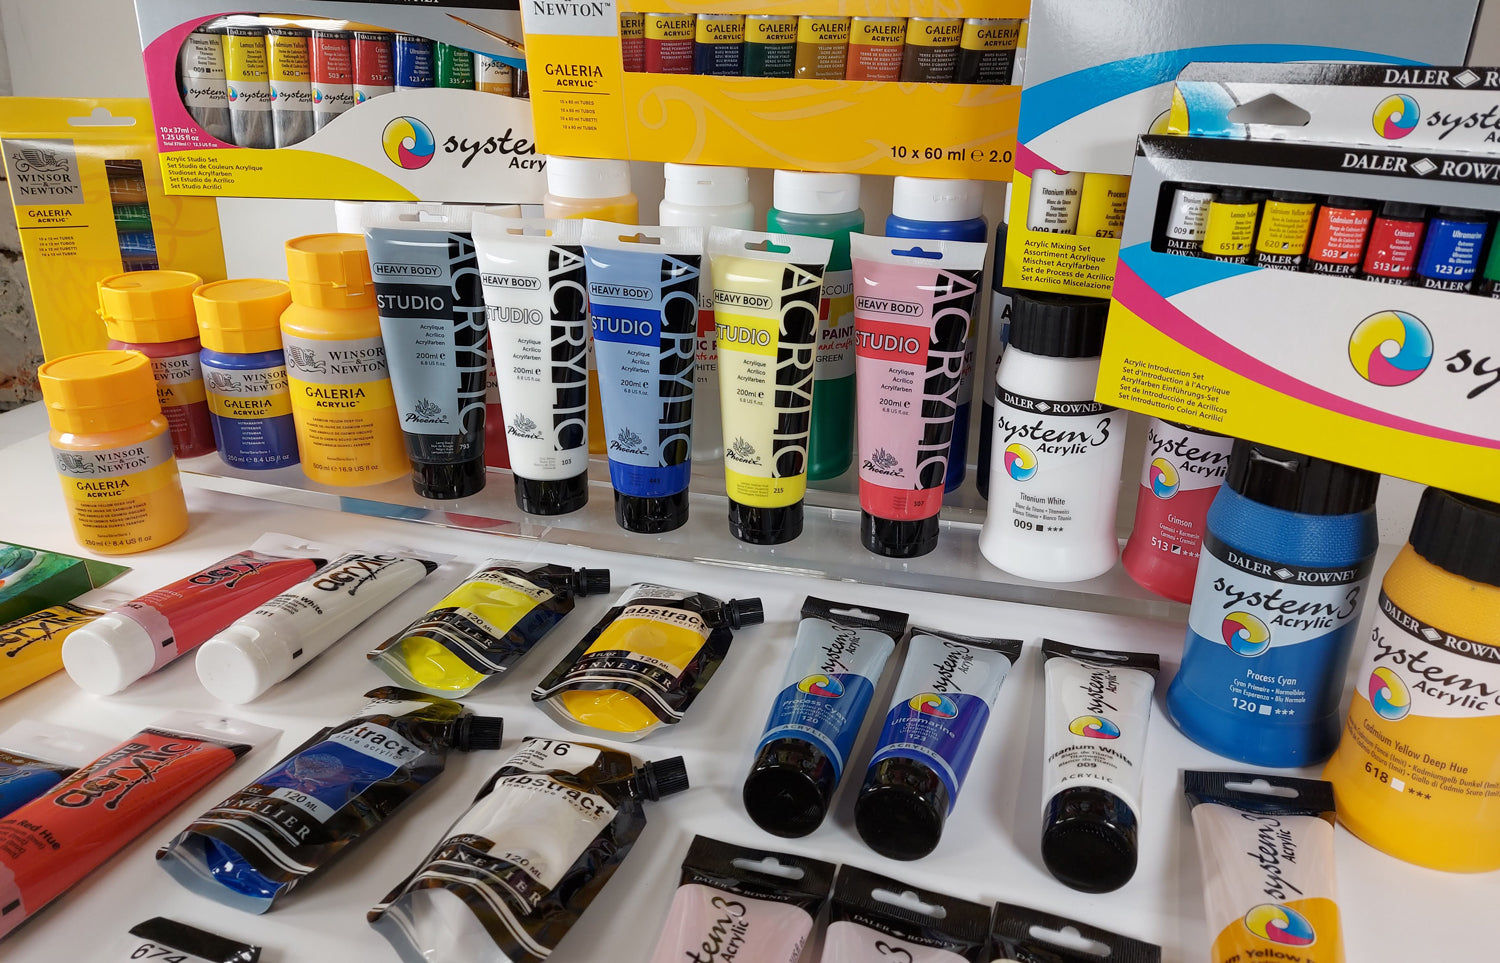 What are the best acrylic paints?